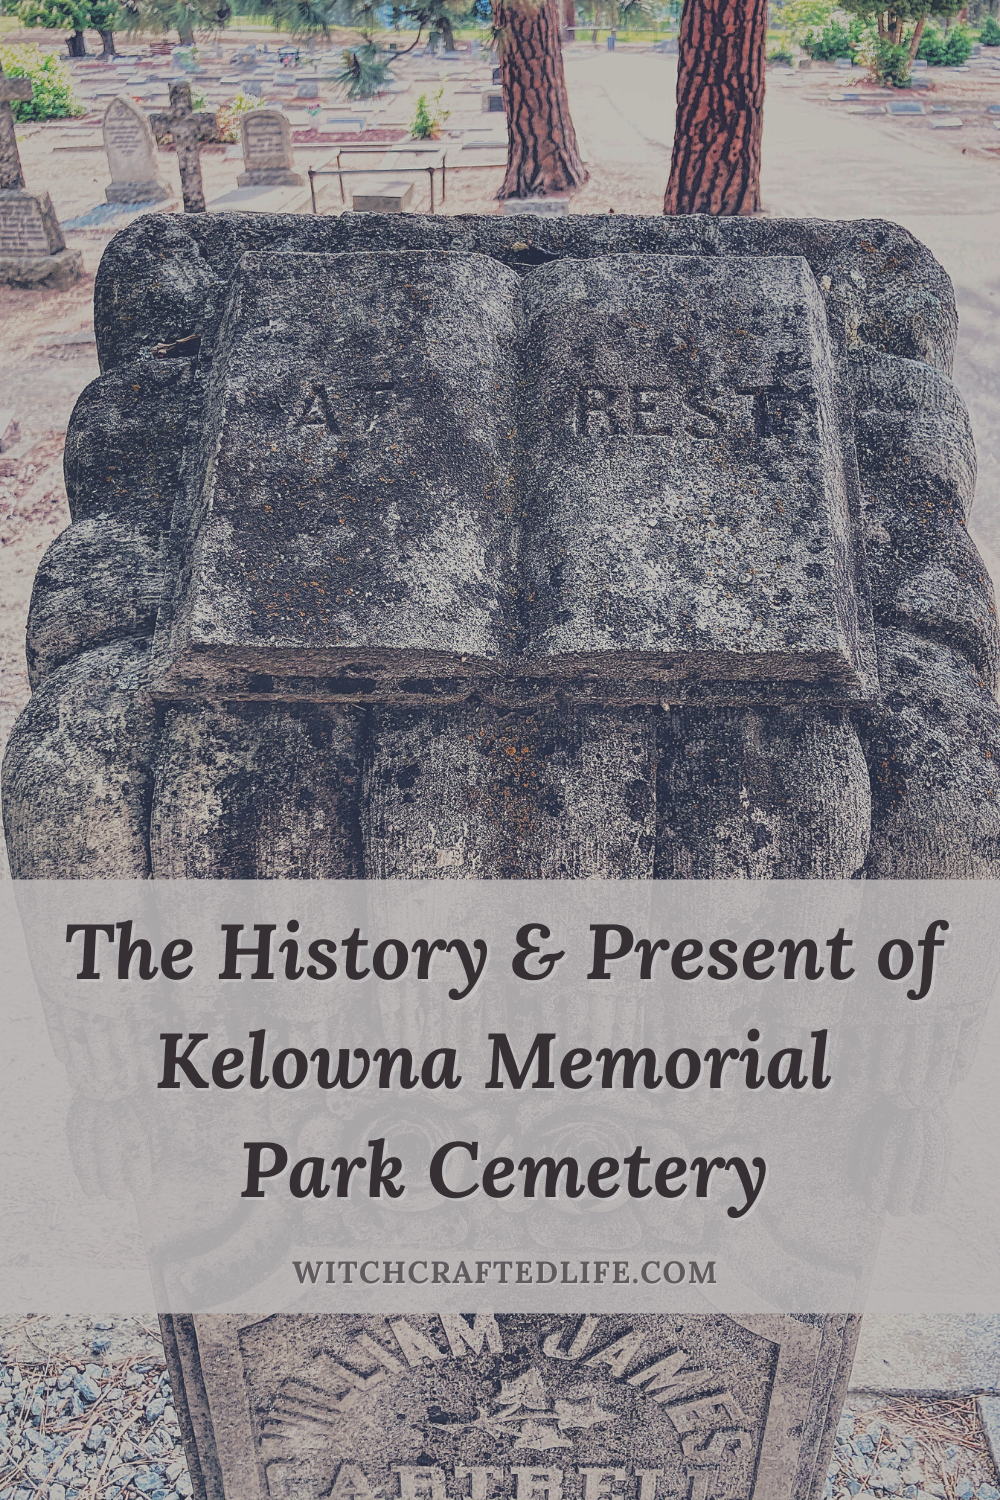 The History and Present of Kelowna Memorial Park Cemetery